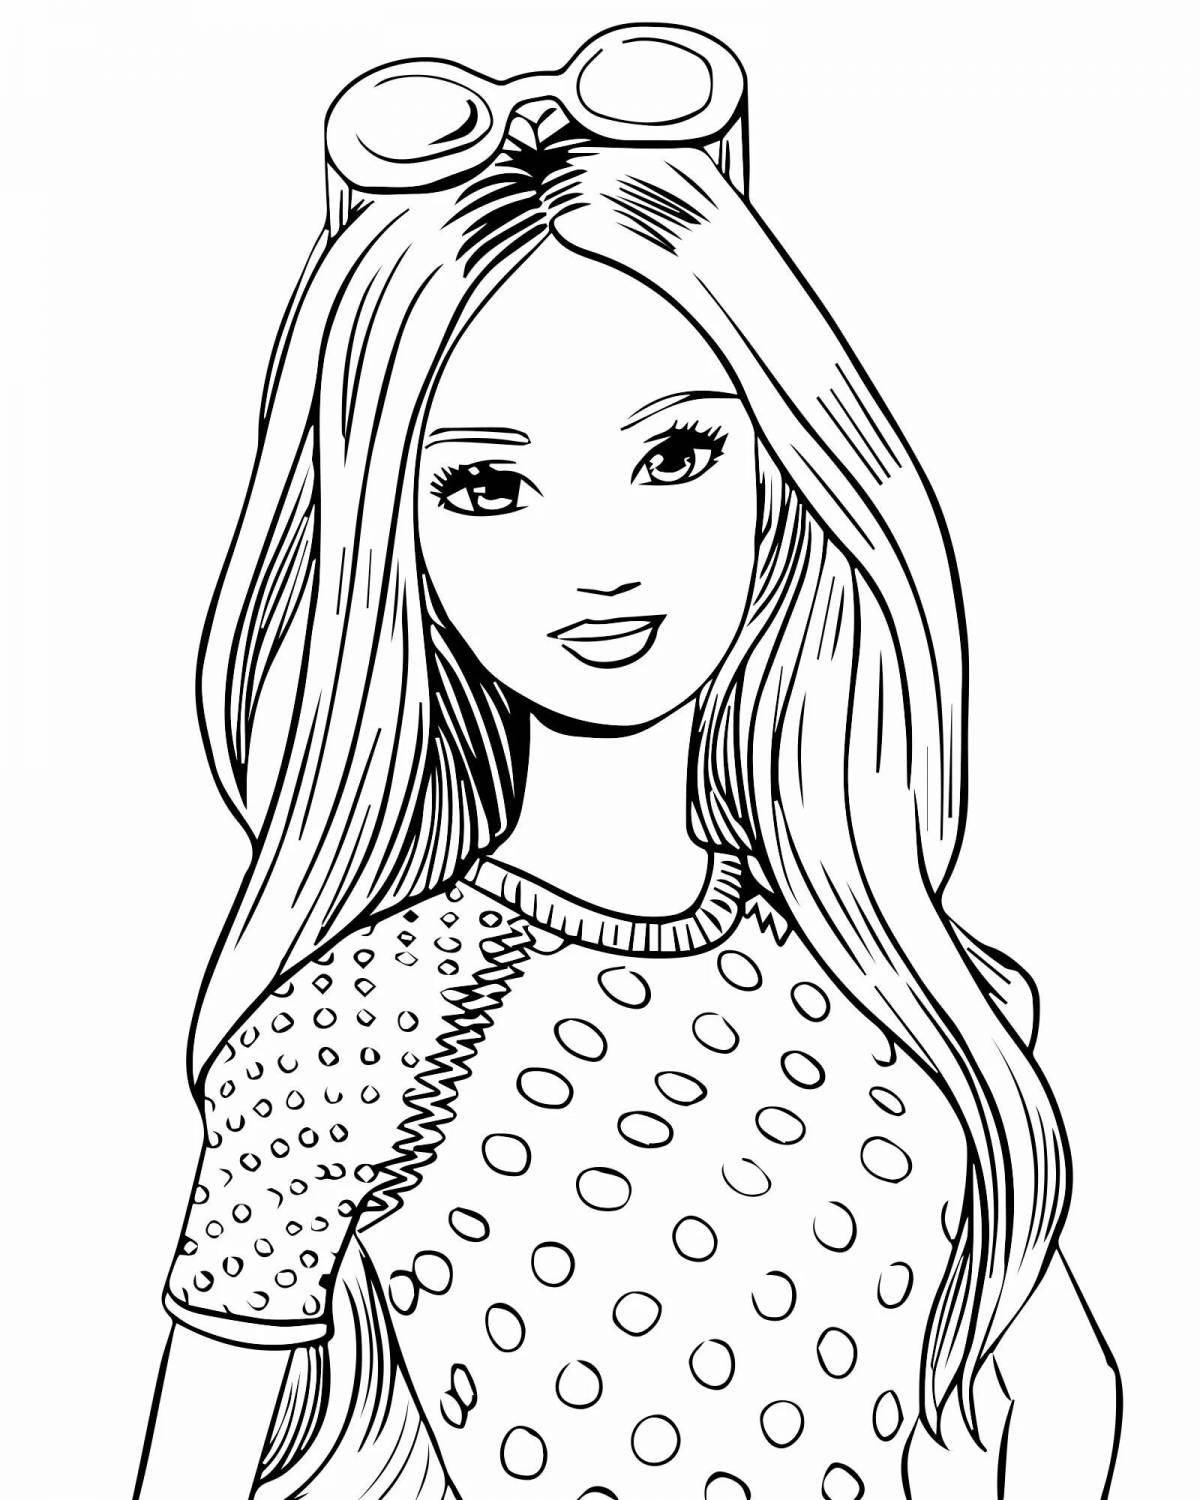 Color-frenzy coloring page for 11 year old girls